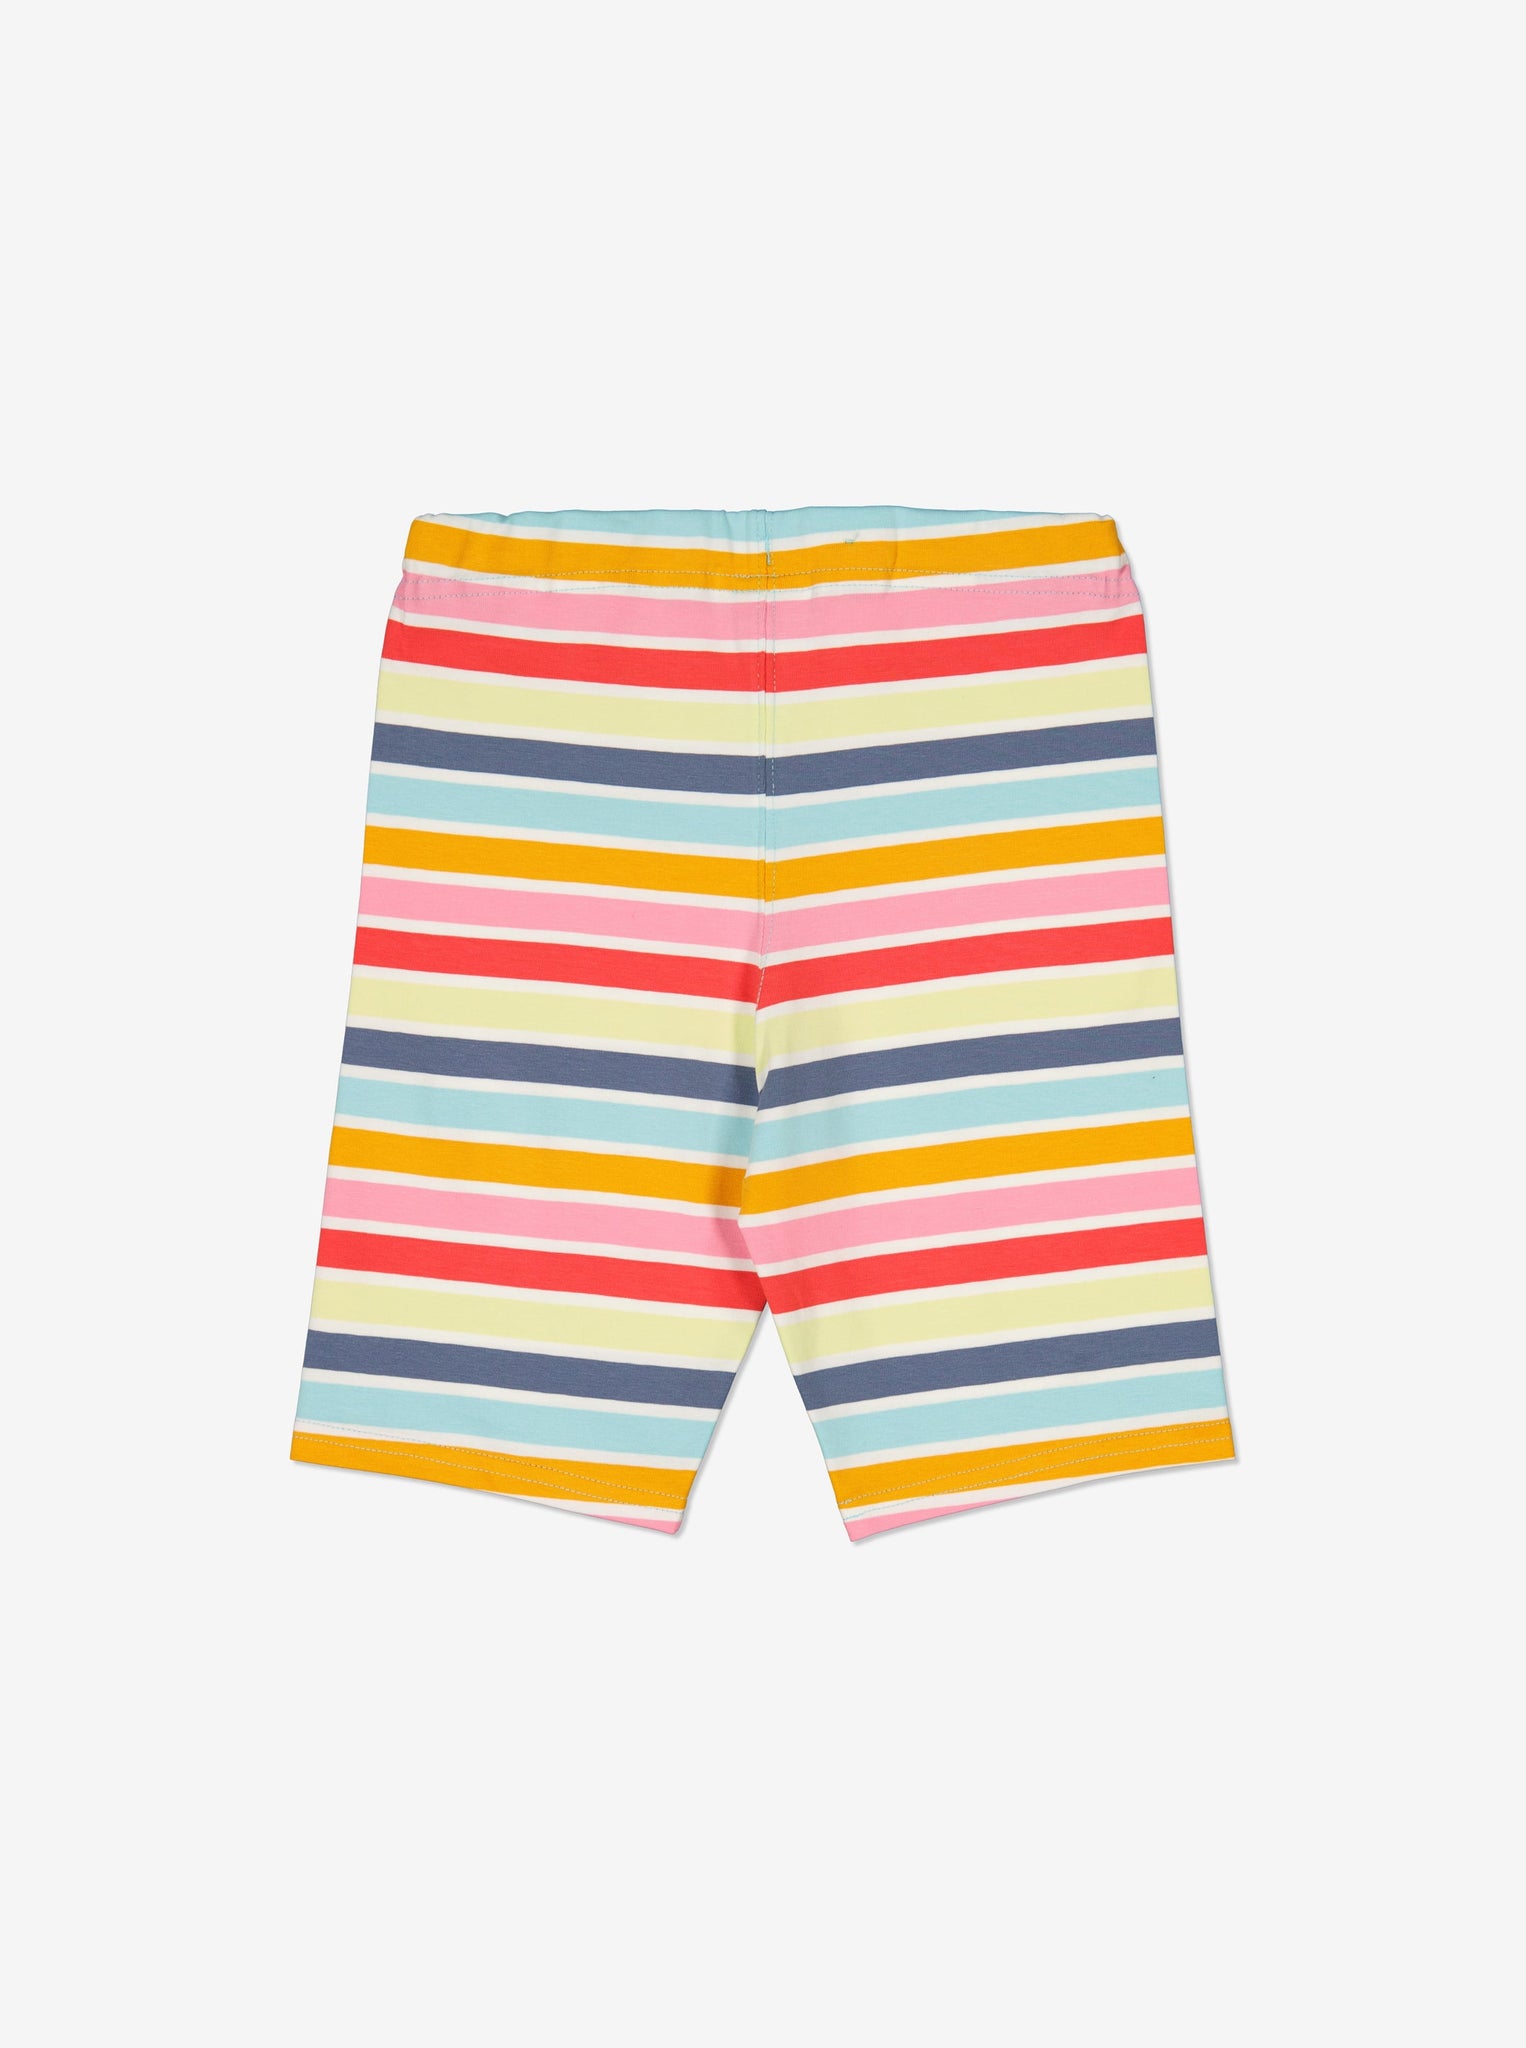 Organic Cotton Striped Kids Cycling Shorts from Polarn O. Pyret Kidswear. Ethically made and sustainably sourced materials.